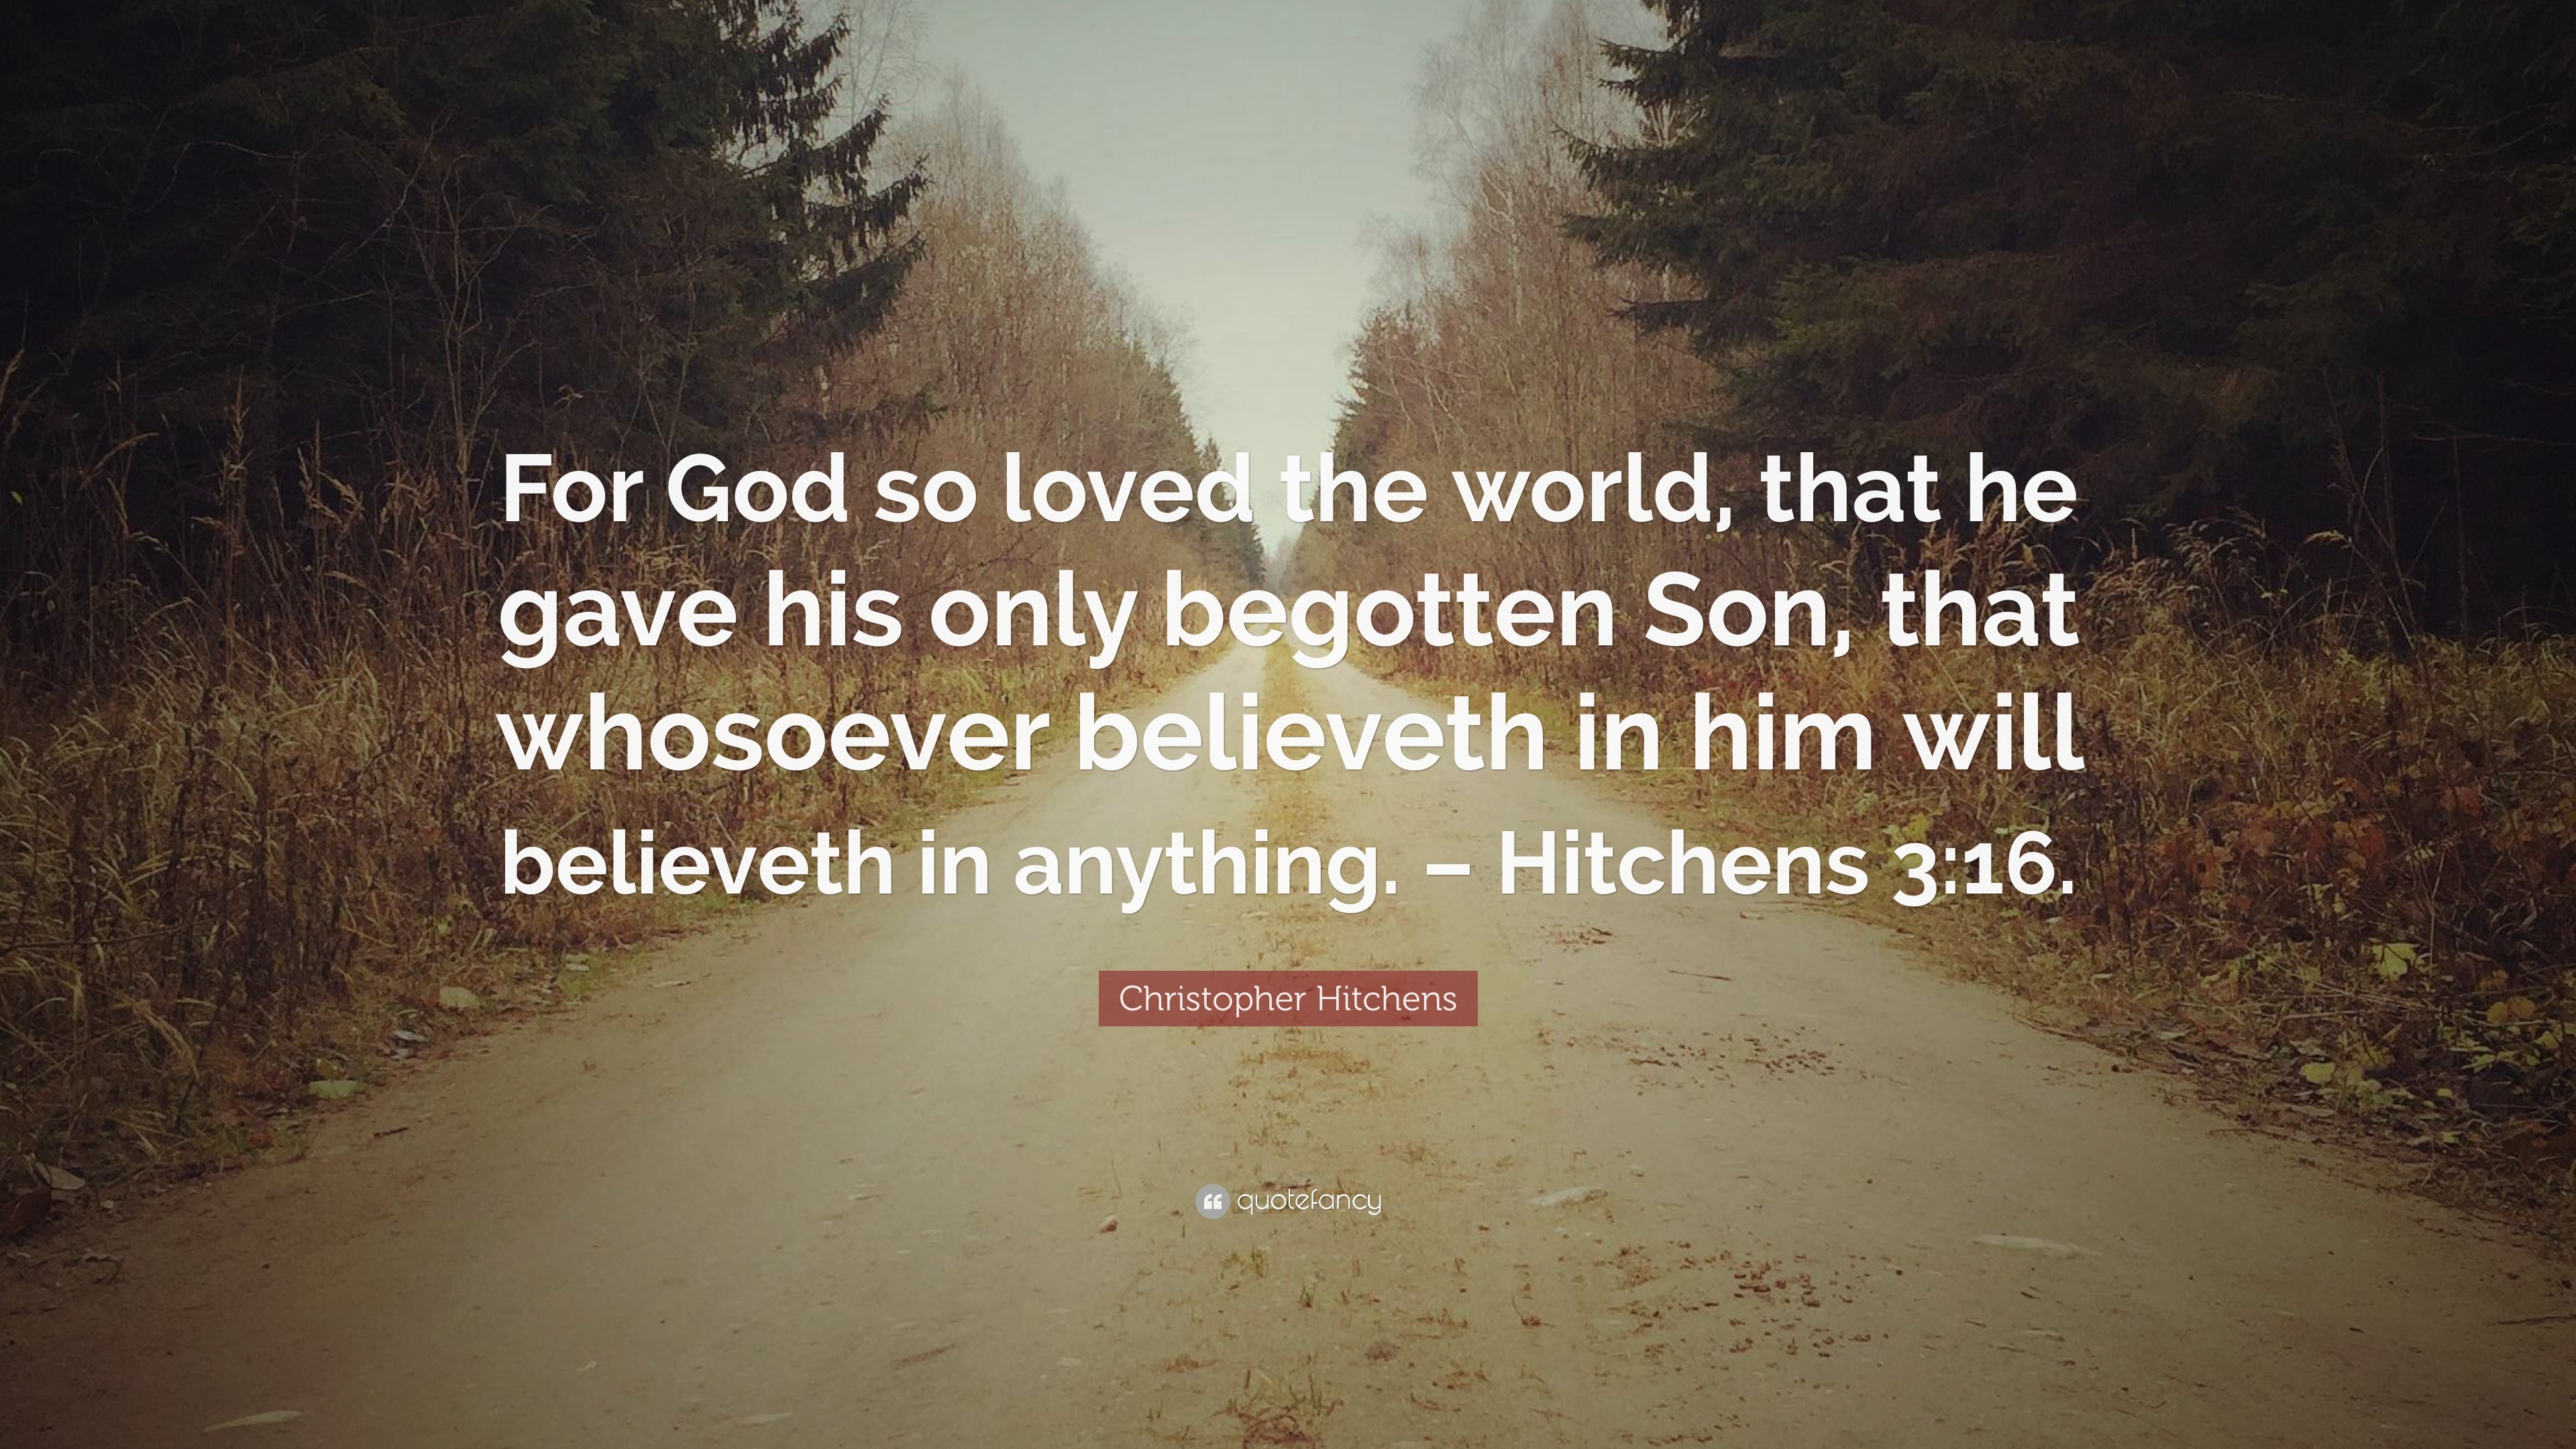 Christopher Hitchens Quote “For God so loved the world that he gave his